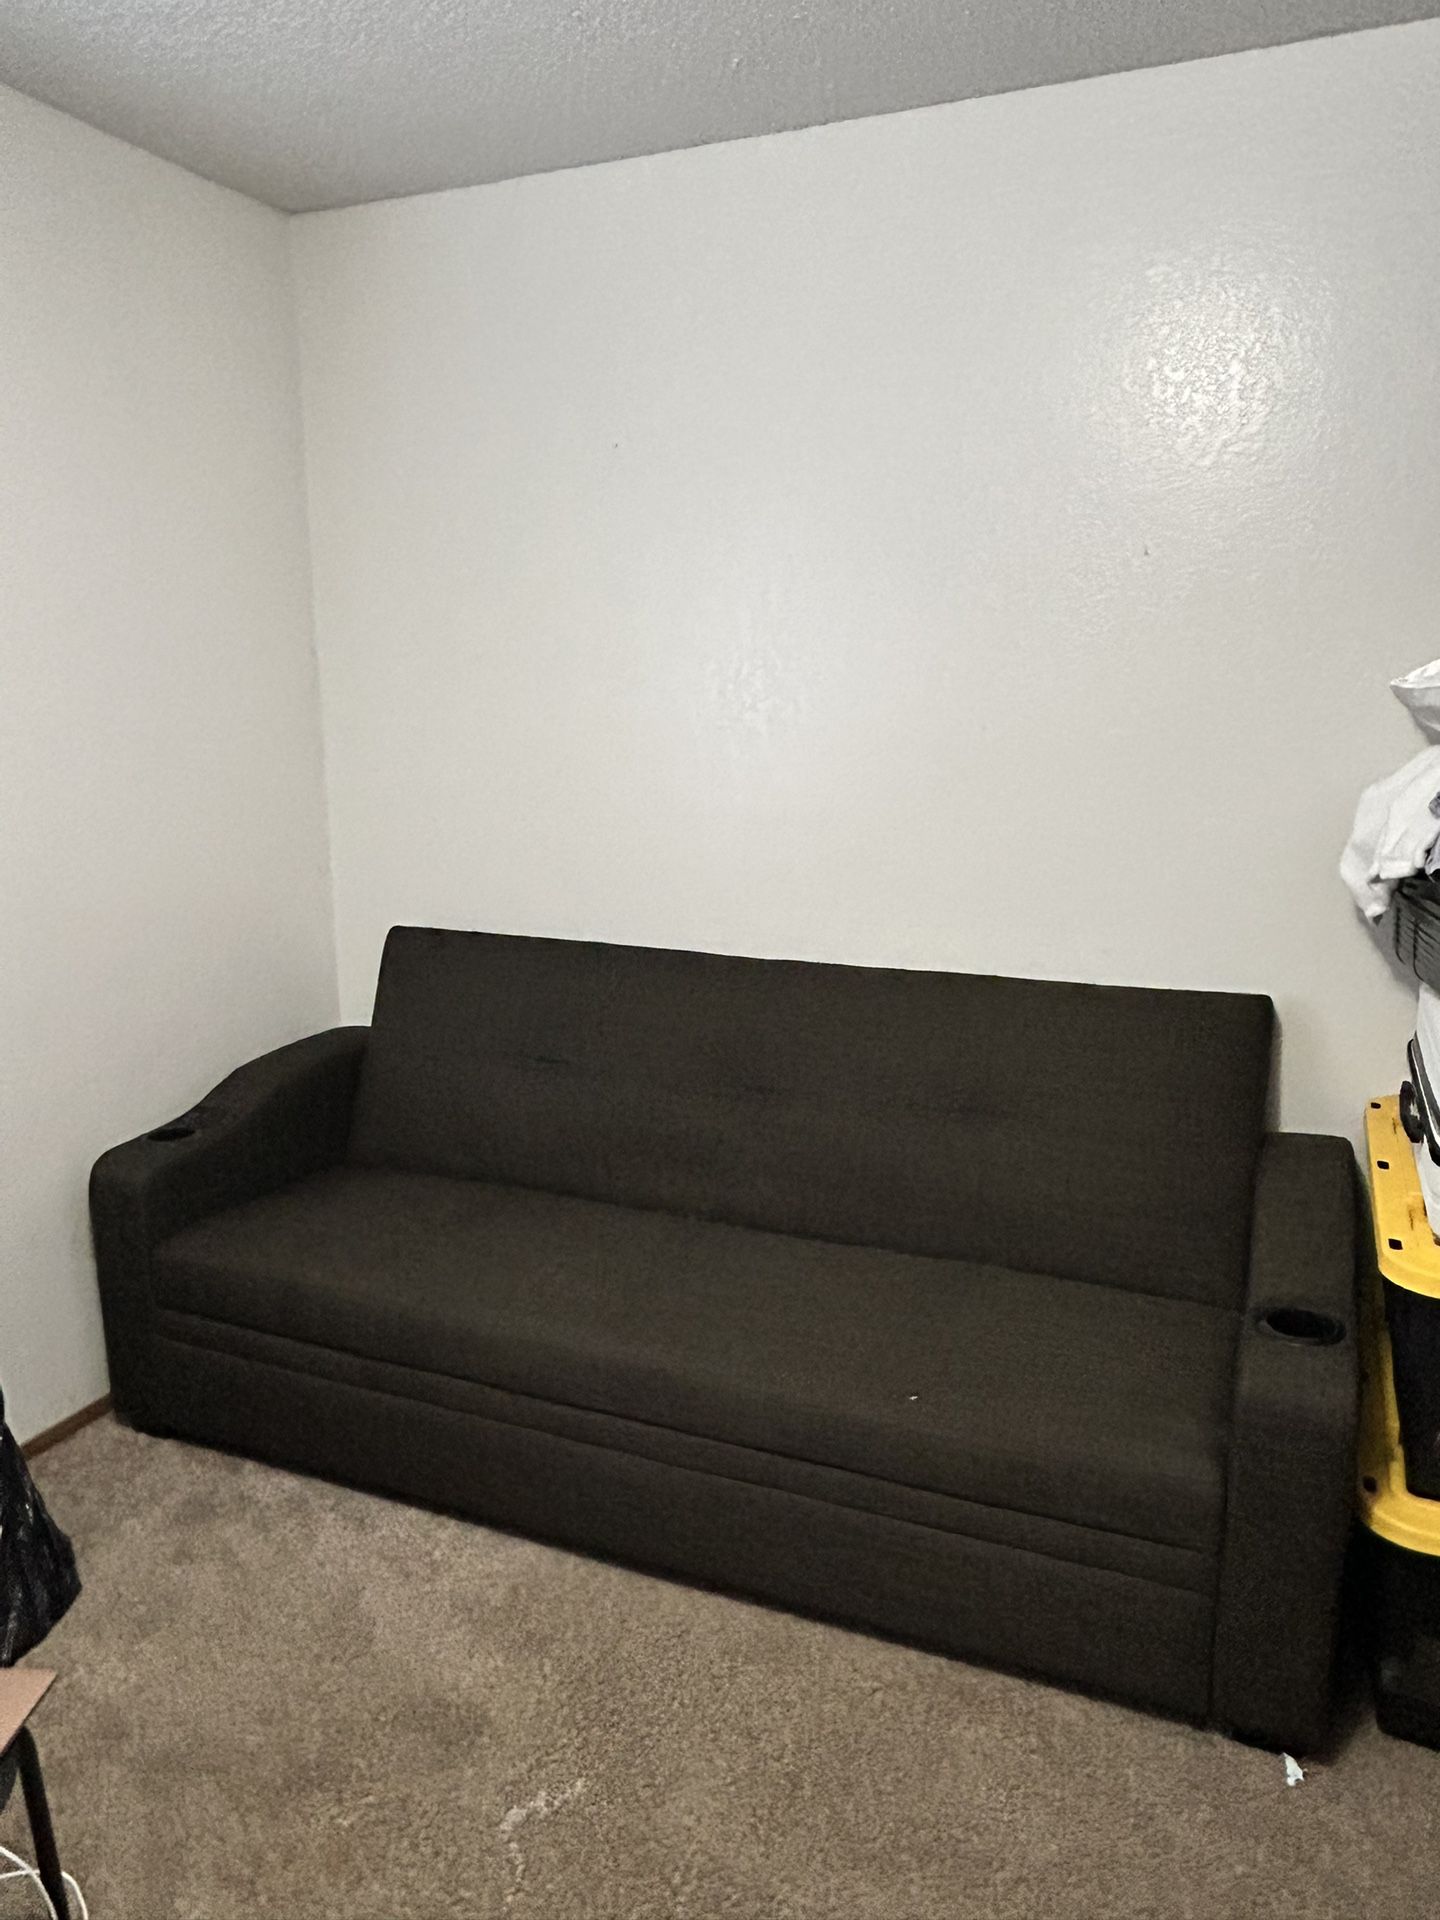 Couch + Bed For Sale 